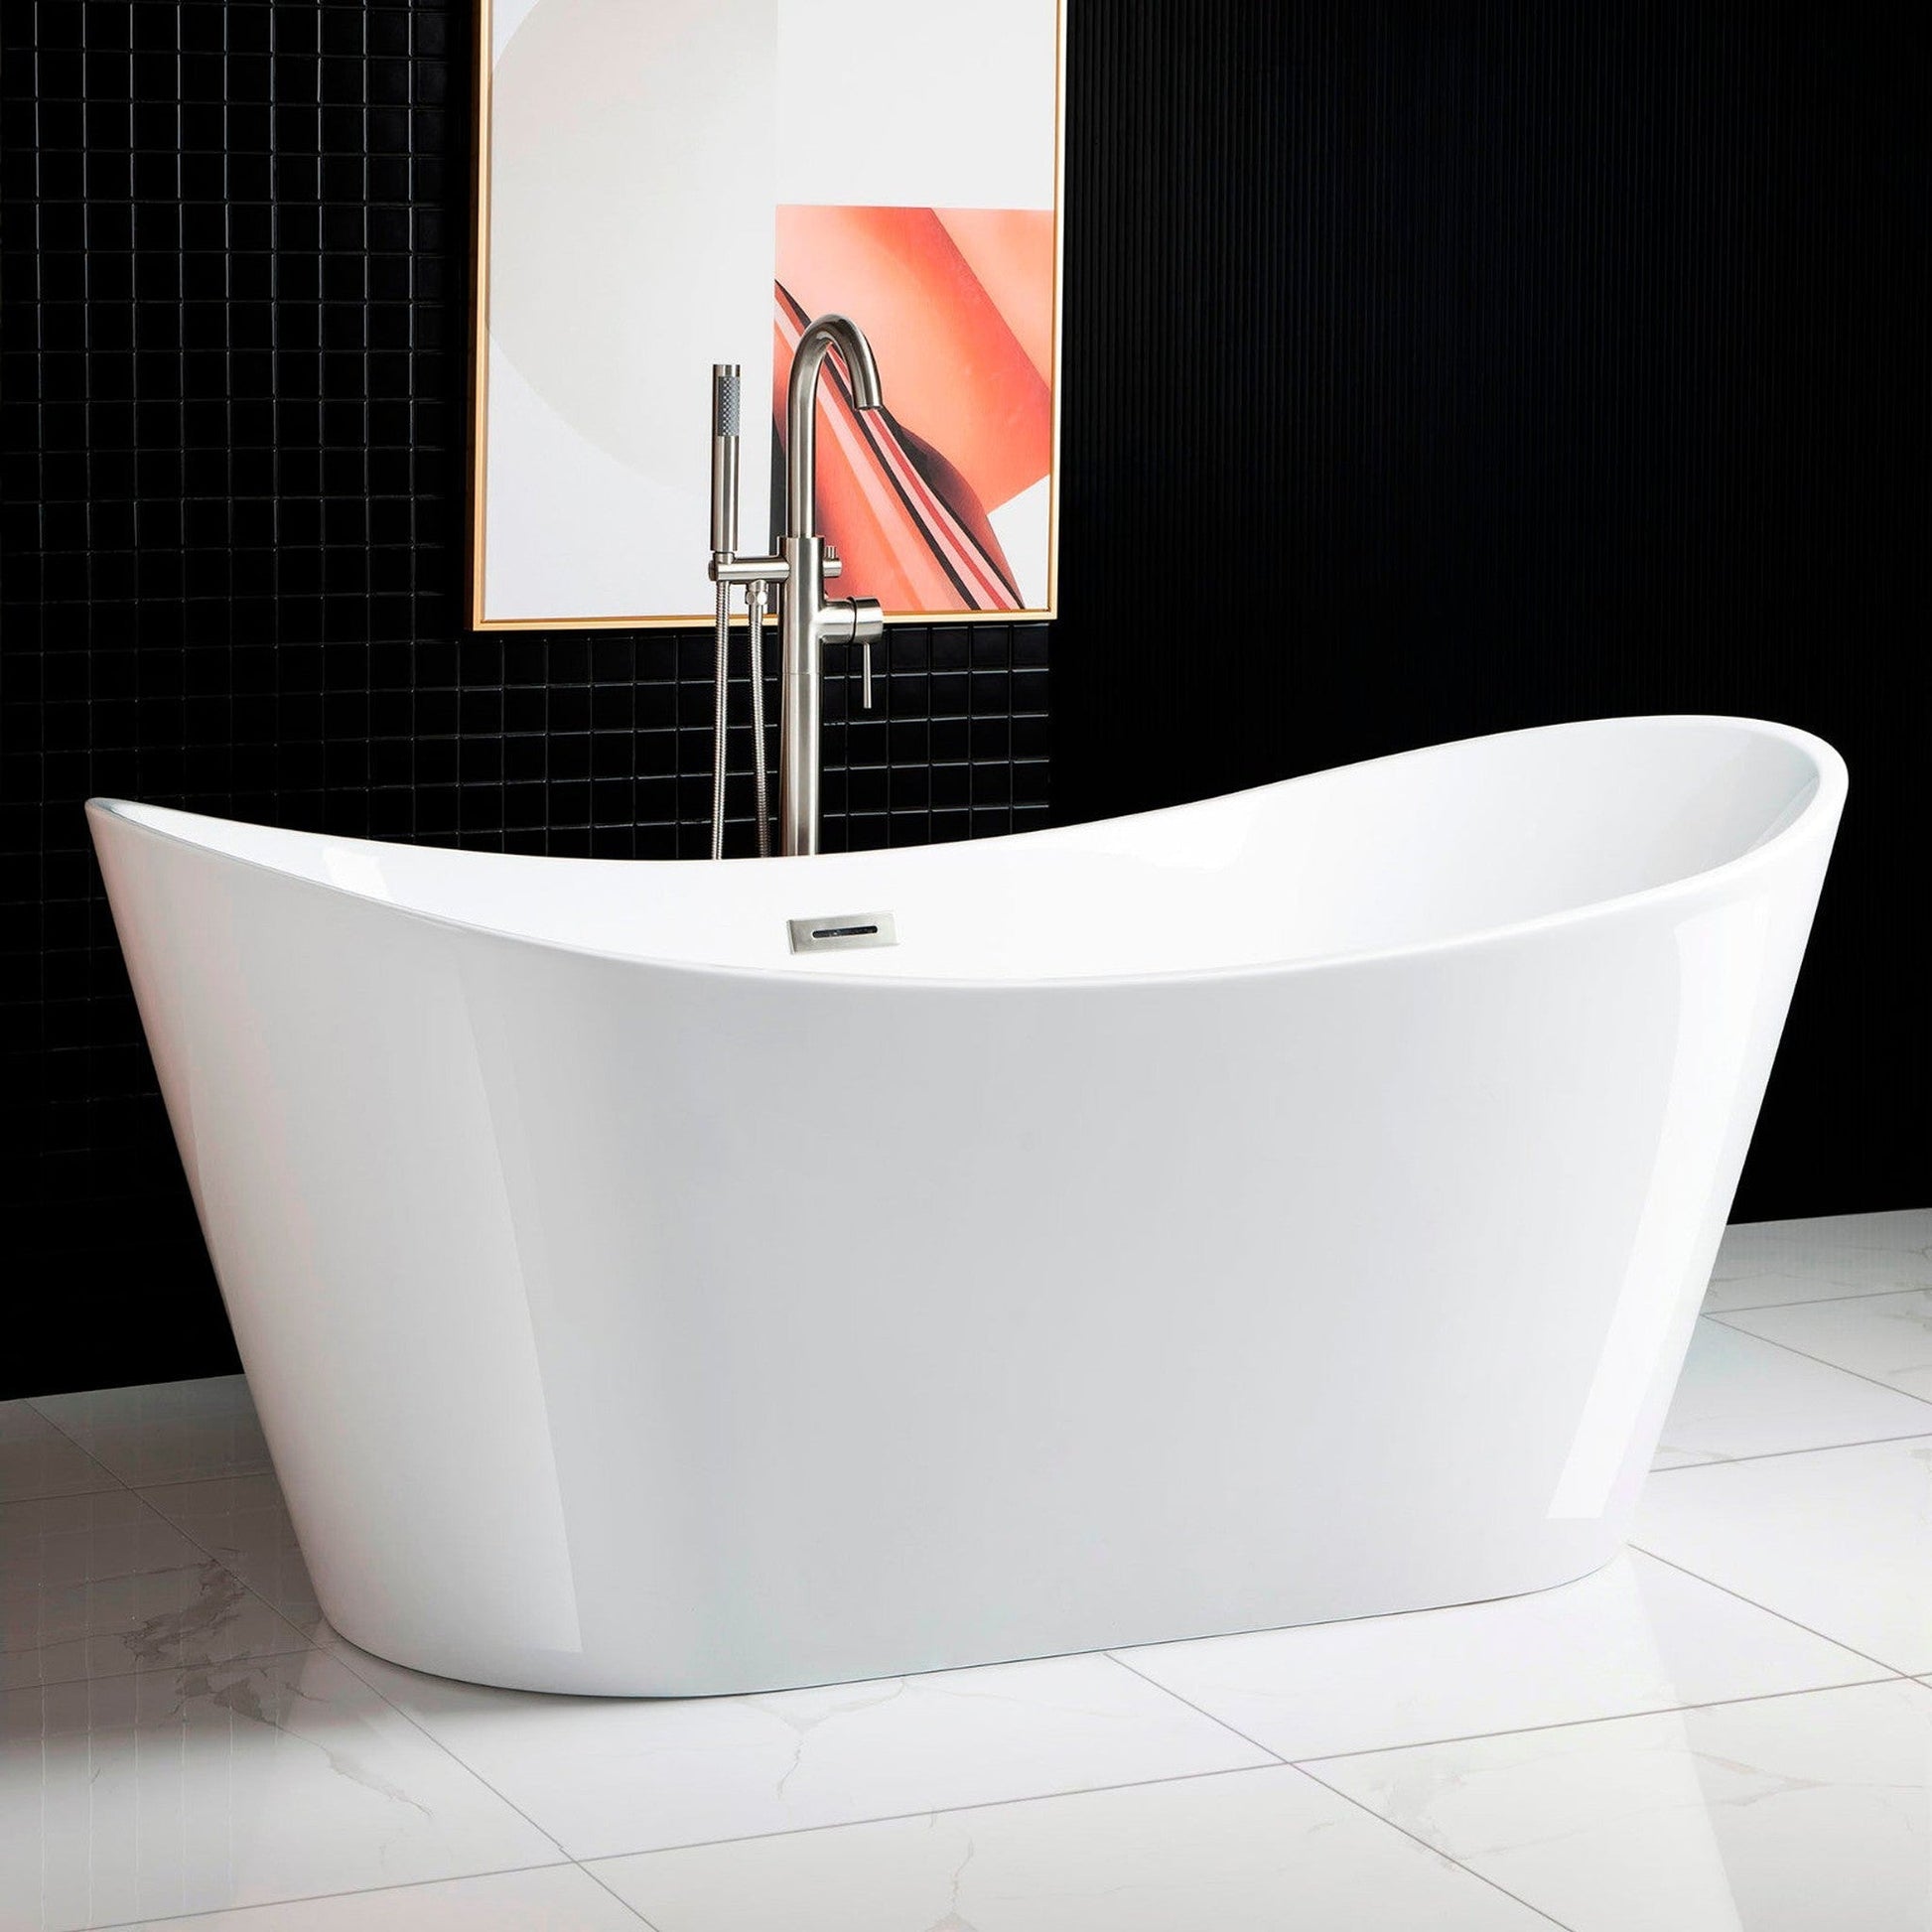 WoodBridge B0010 67" White Acrylic Freestanding Contemporary Soaking Bathtub With Chrome Drain, Overflow, F-0013 Tub Filler and Caddy Tray